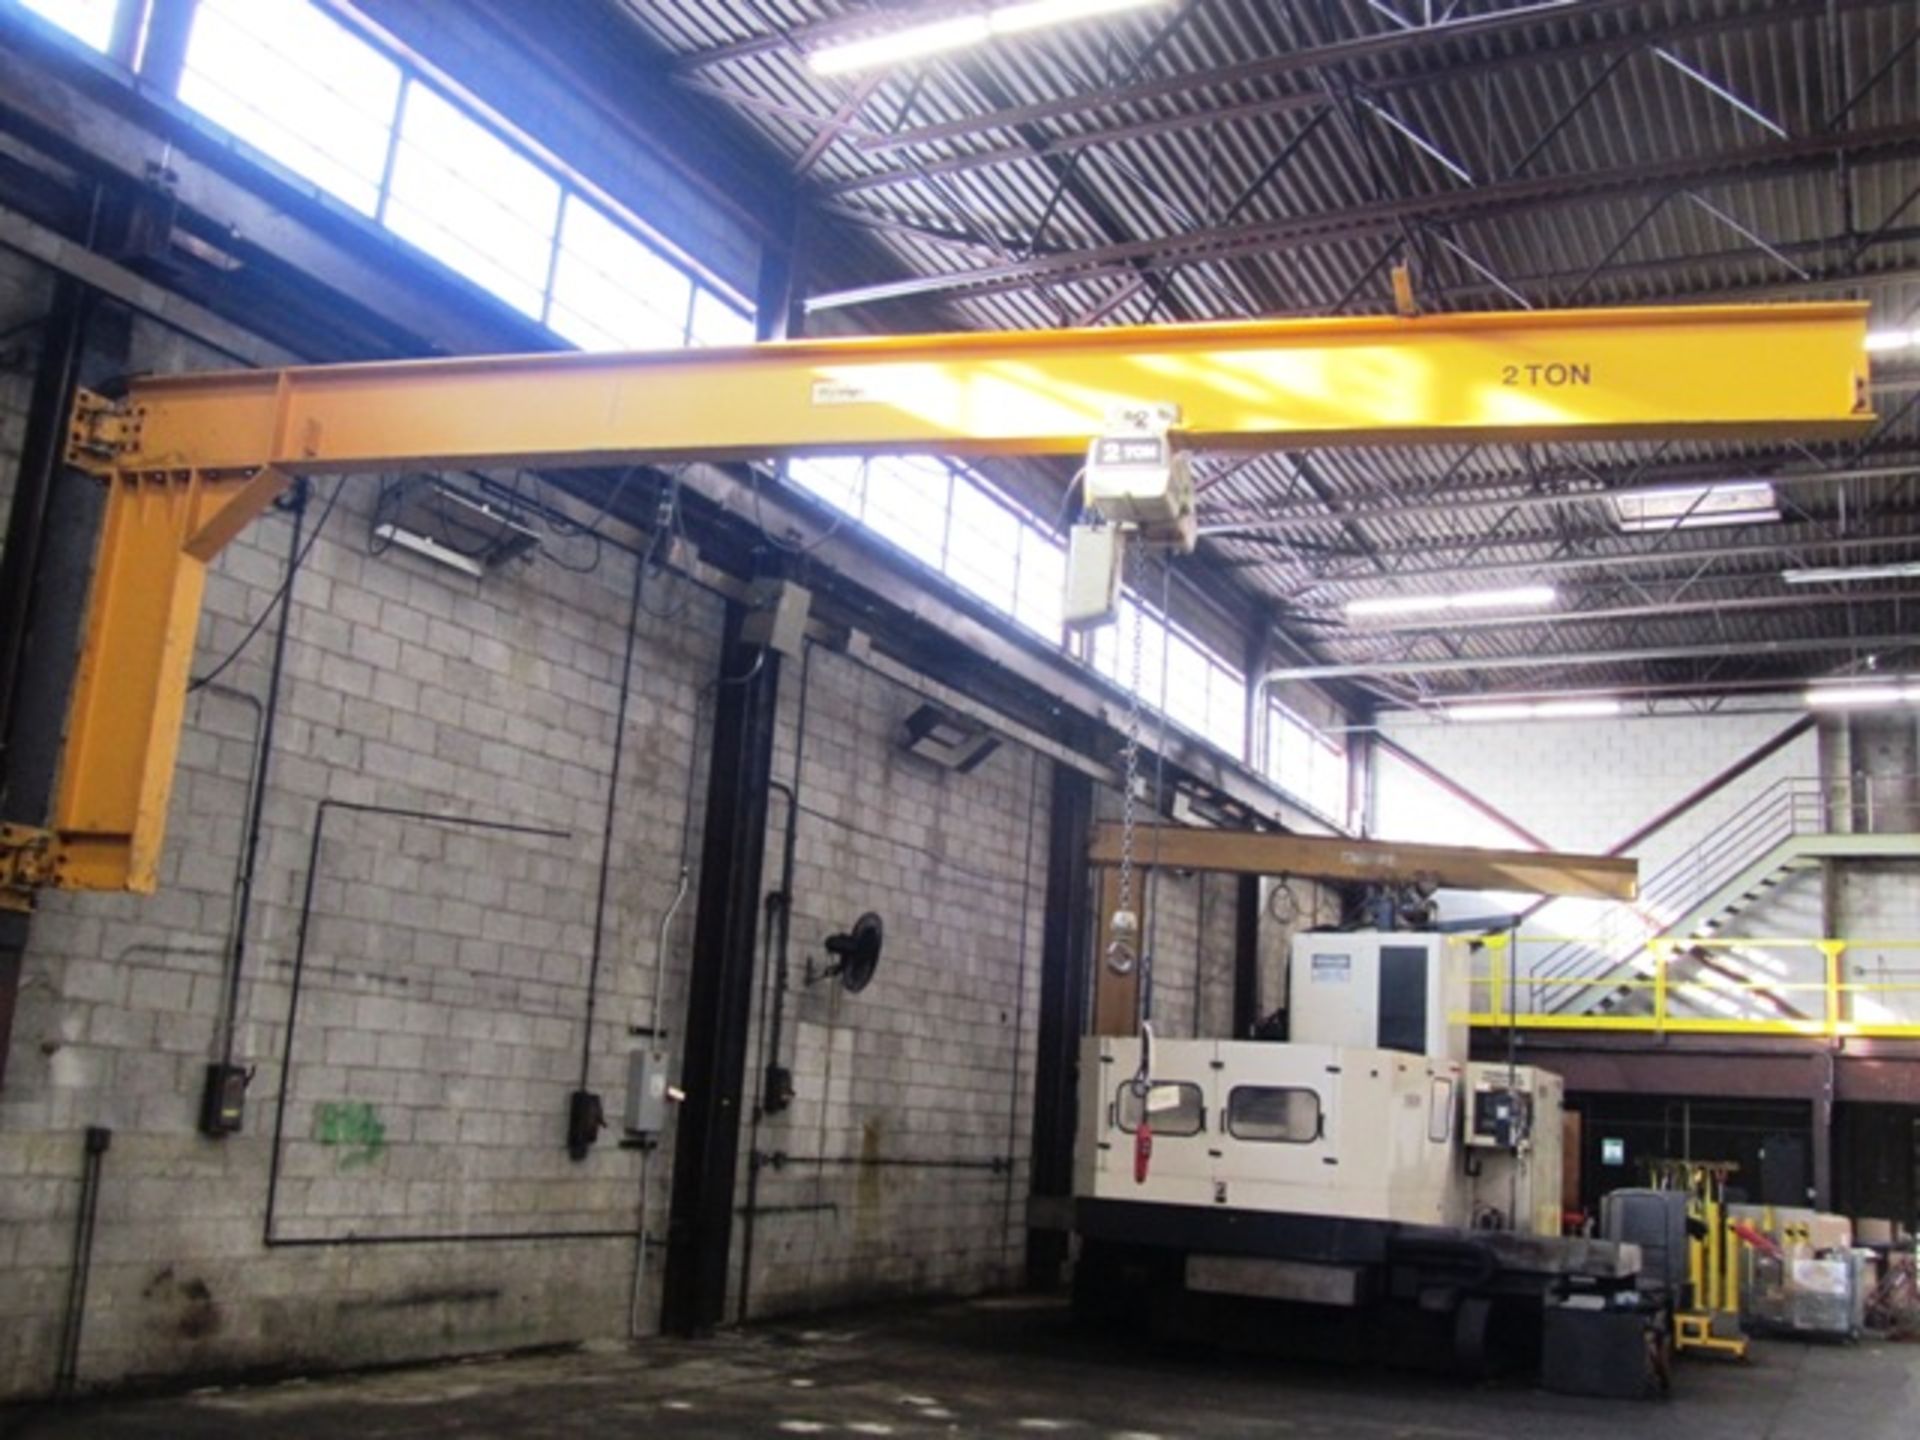 Wynright 2 Ton Wall Mounted Jib Crane with Coffing 2 Ton Electric Hoist with Pendant Control